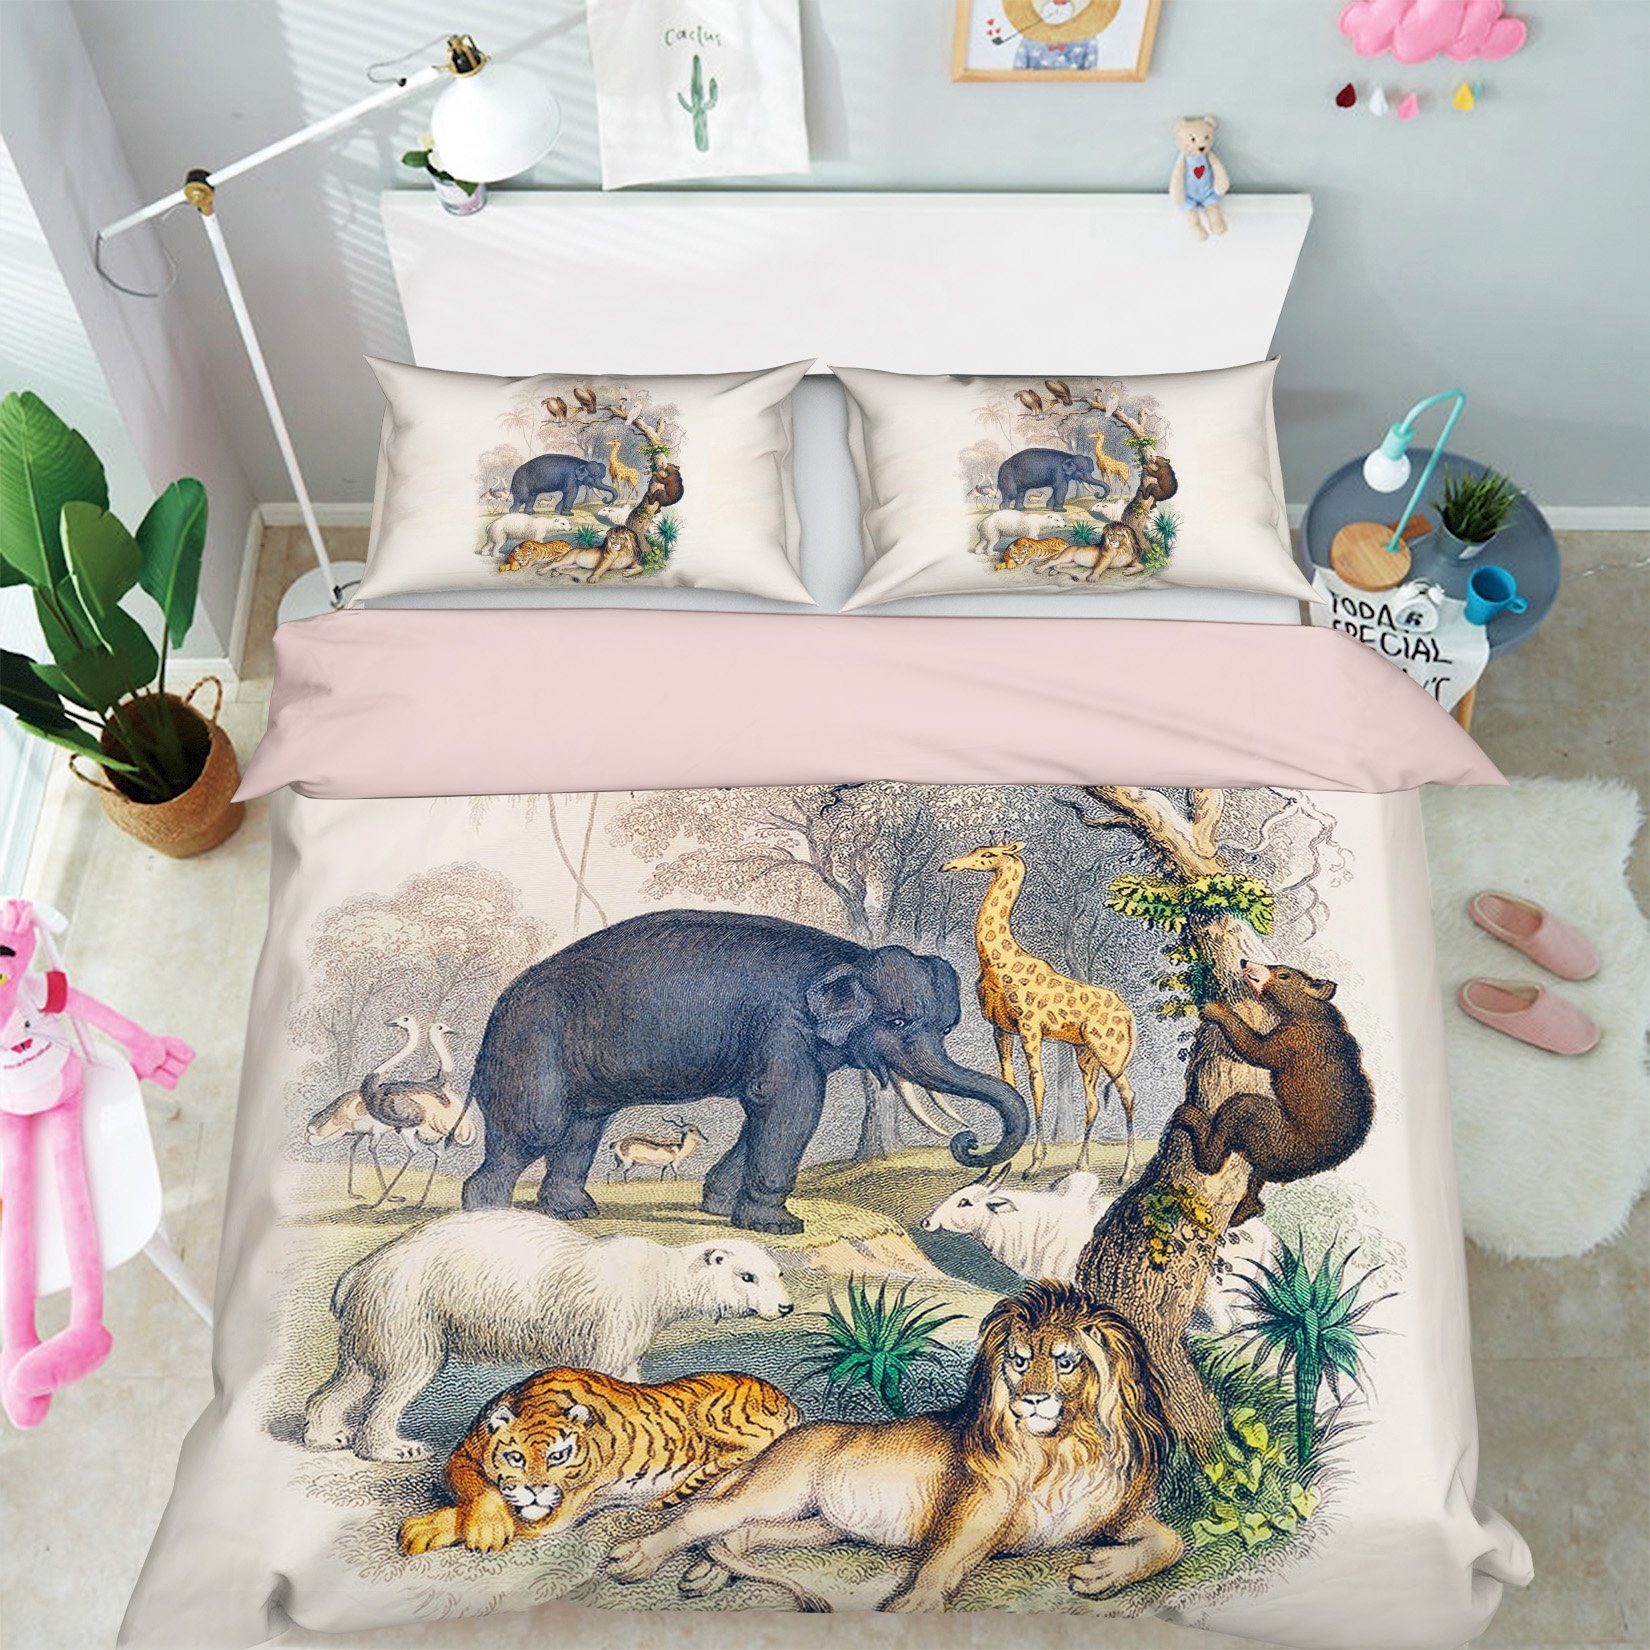 3D ZOO 1948 Bed Pillowcases Quilt Quiet Covers AJ Creativity Home 